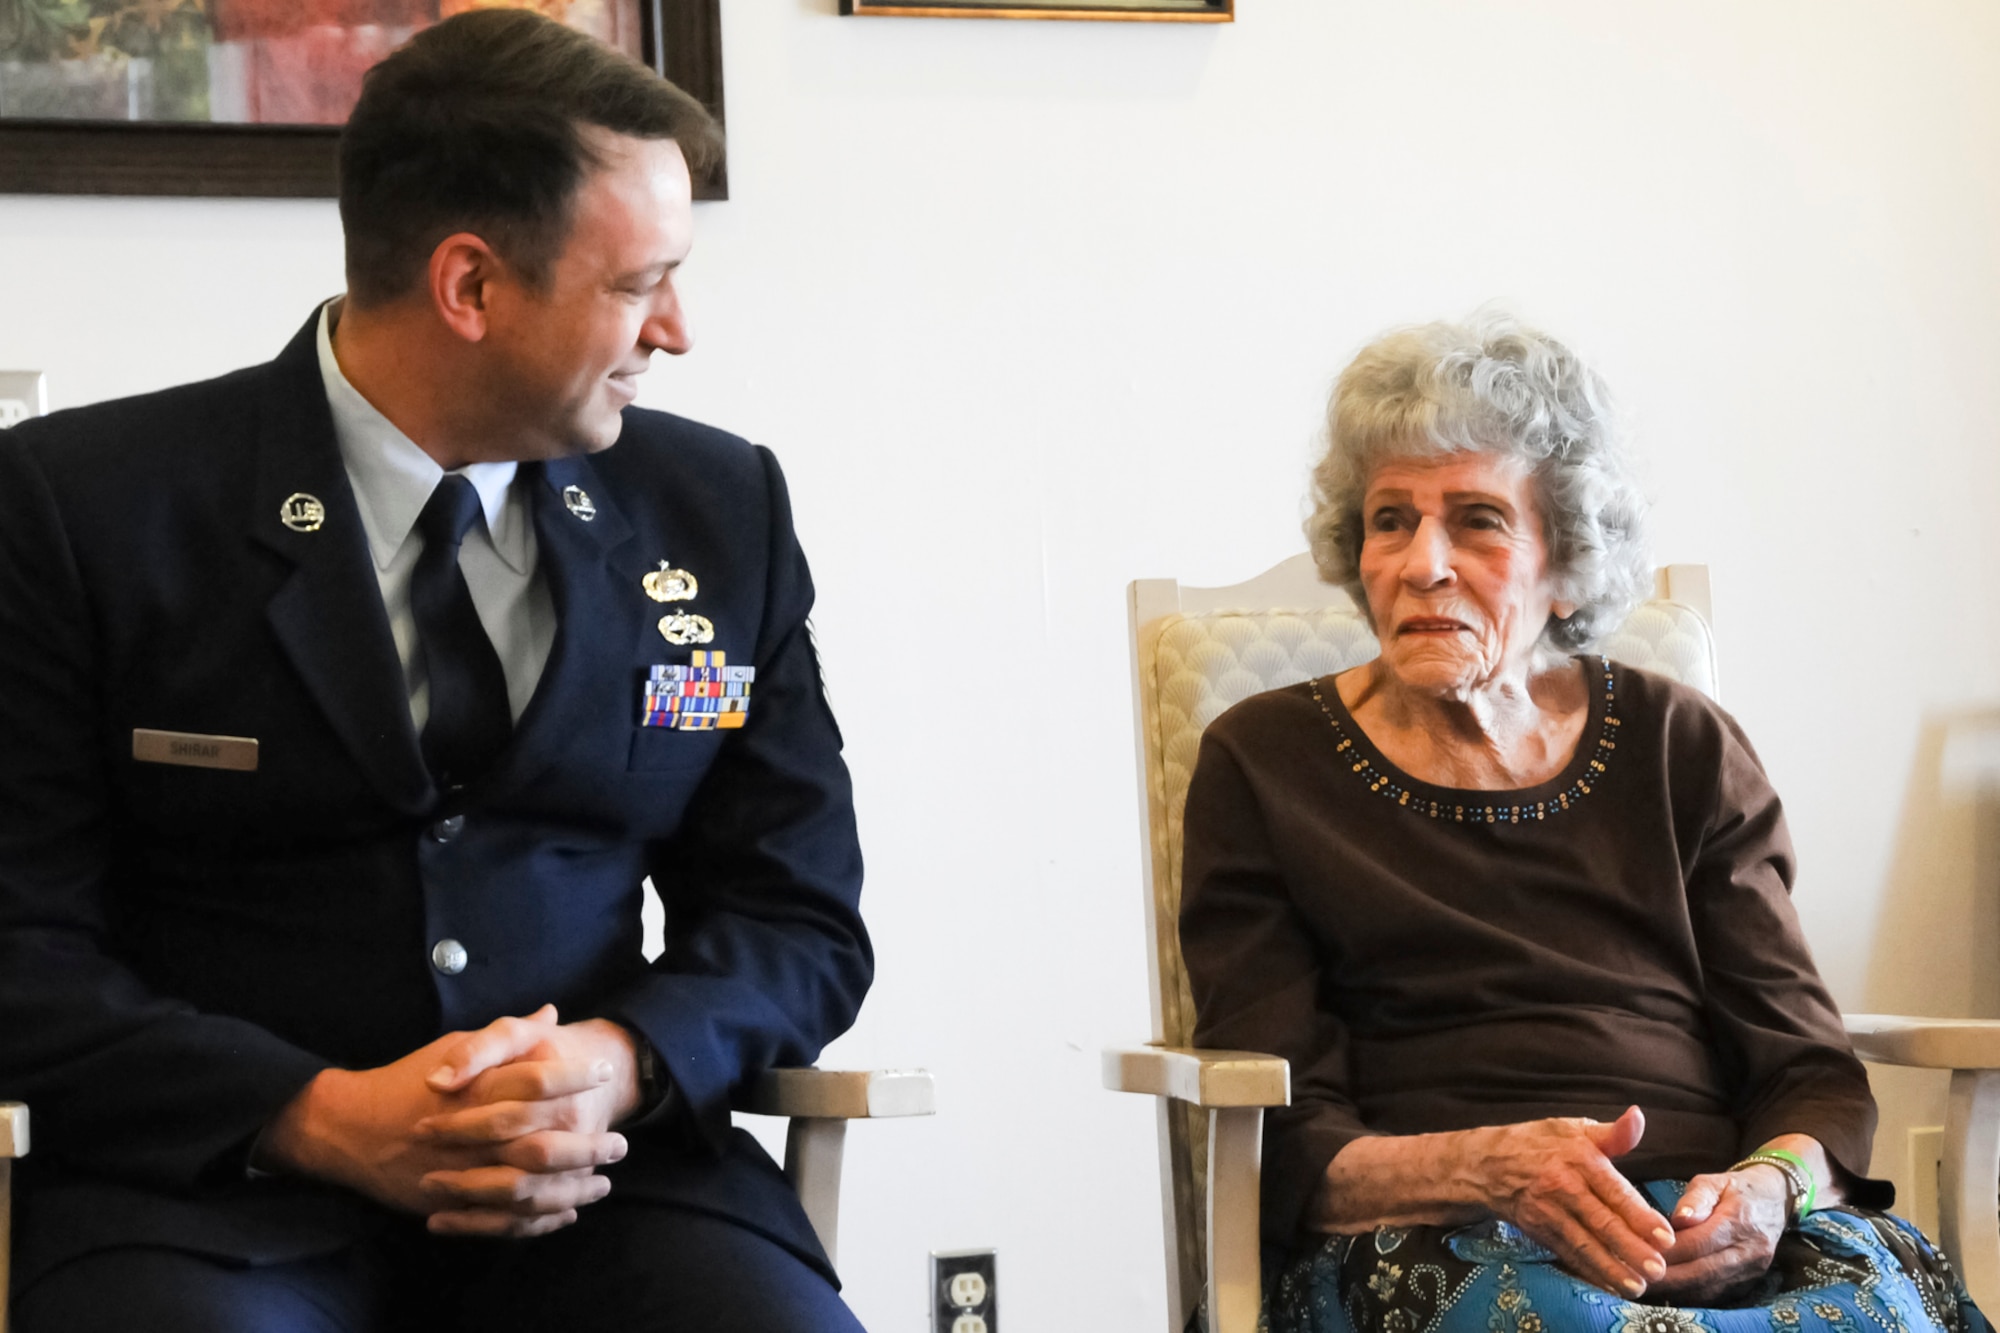 Tech. Sgt. Michael Shirar, 173rd Fighter Wing Maintenace Training Manager, talks with Mrs. Irene Dalton, one of the Rose Queen canidates, before the ceremony.  Members of the Oregon Air National Guard volunteered to help with the 2011 Rose Queen Corenation ceremony at Plum Ridge Marquis Care in Klamath Falls, Ore. April 8, 2011. (U.S. Air Force Photo by Tech.Sgt. Jennifer Shirar, RELEASED)